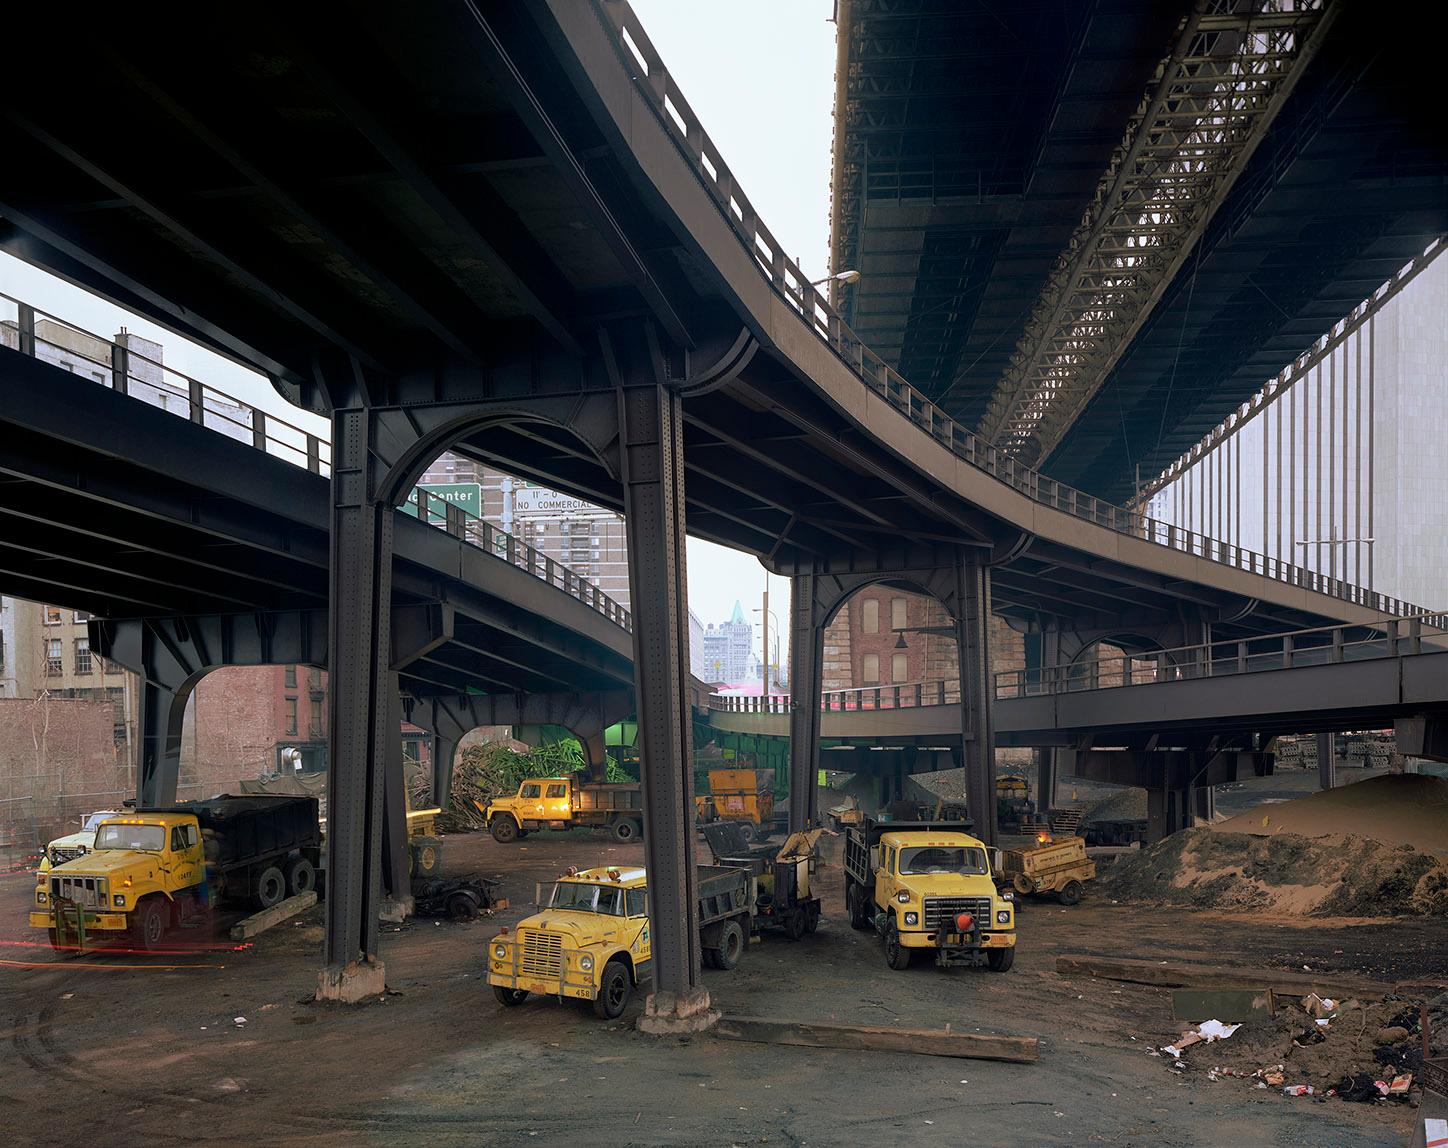 Archival Pigment Print

Early 80's NYC scene

All available sizes & editions for each size of this photograph:
30" x 40” - Edition of 5 + 2 Artist Proofs
40" X 50"- Edition of 5 + 2 Artist Proofs
50" X 60"-  Edition of 5 + 2 Artist Proofs

This